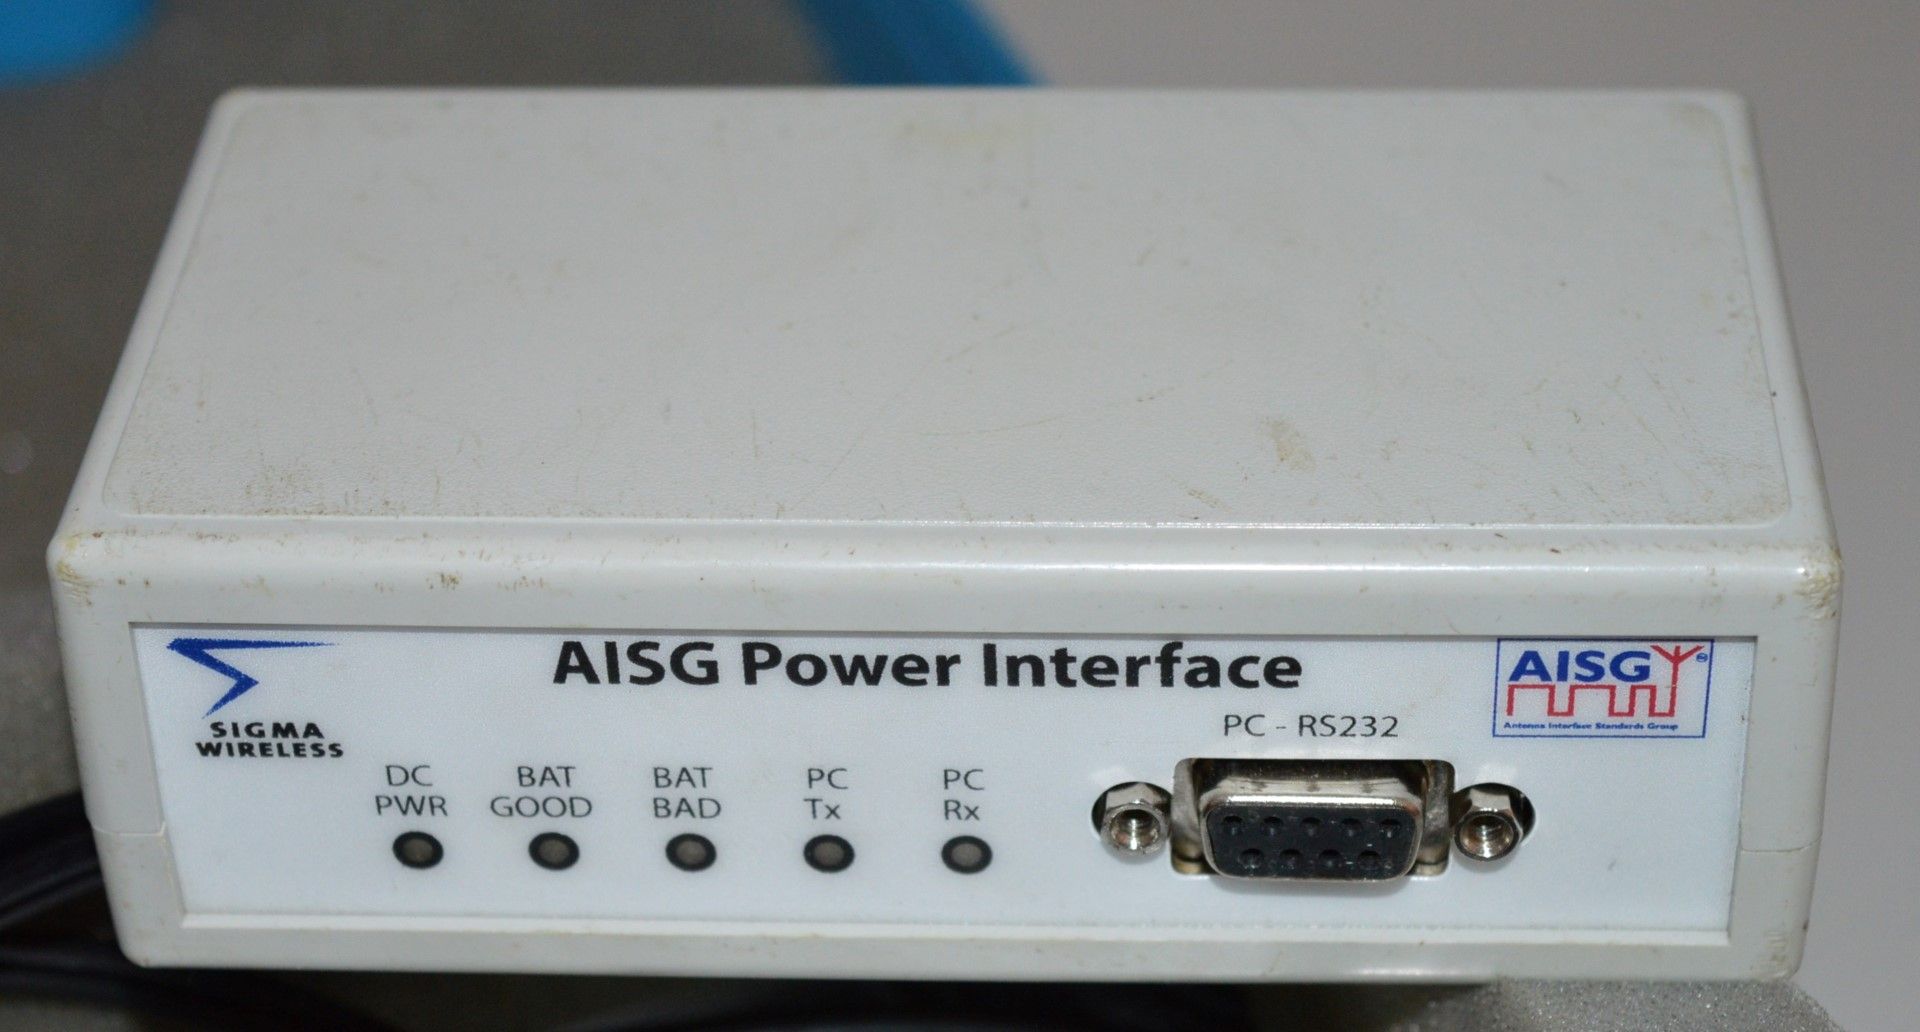 1 x Sigma AISG Power Interface - Rechargwable Version - Wireless Controller - CL300 - Ref PC255 - - Image 5 of 6